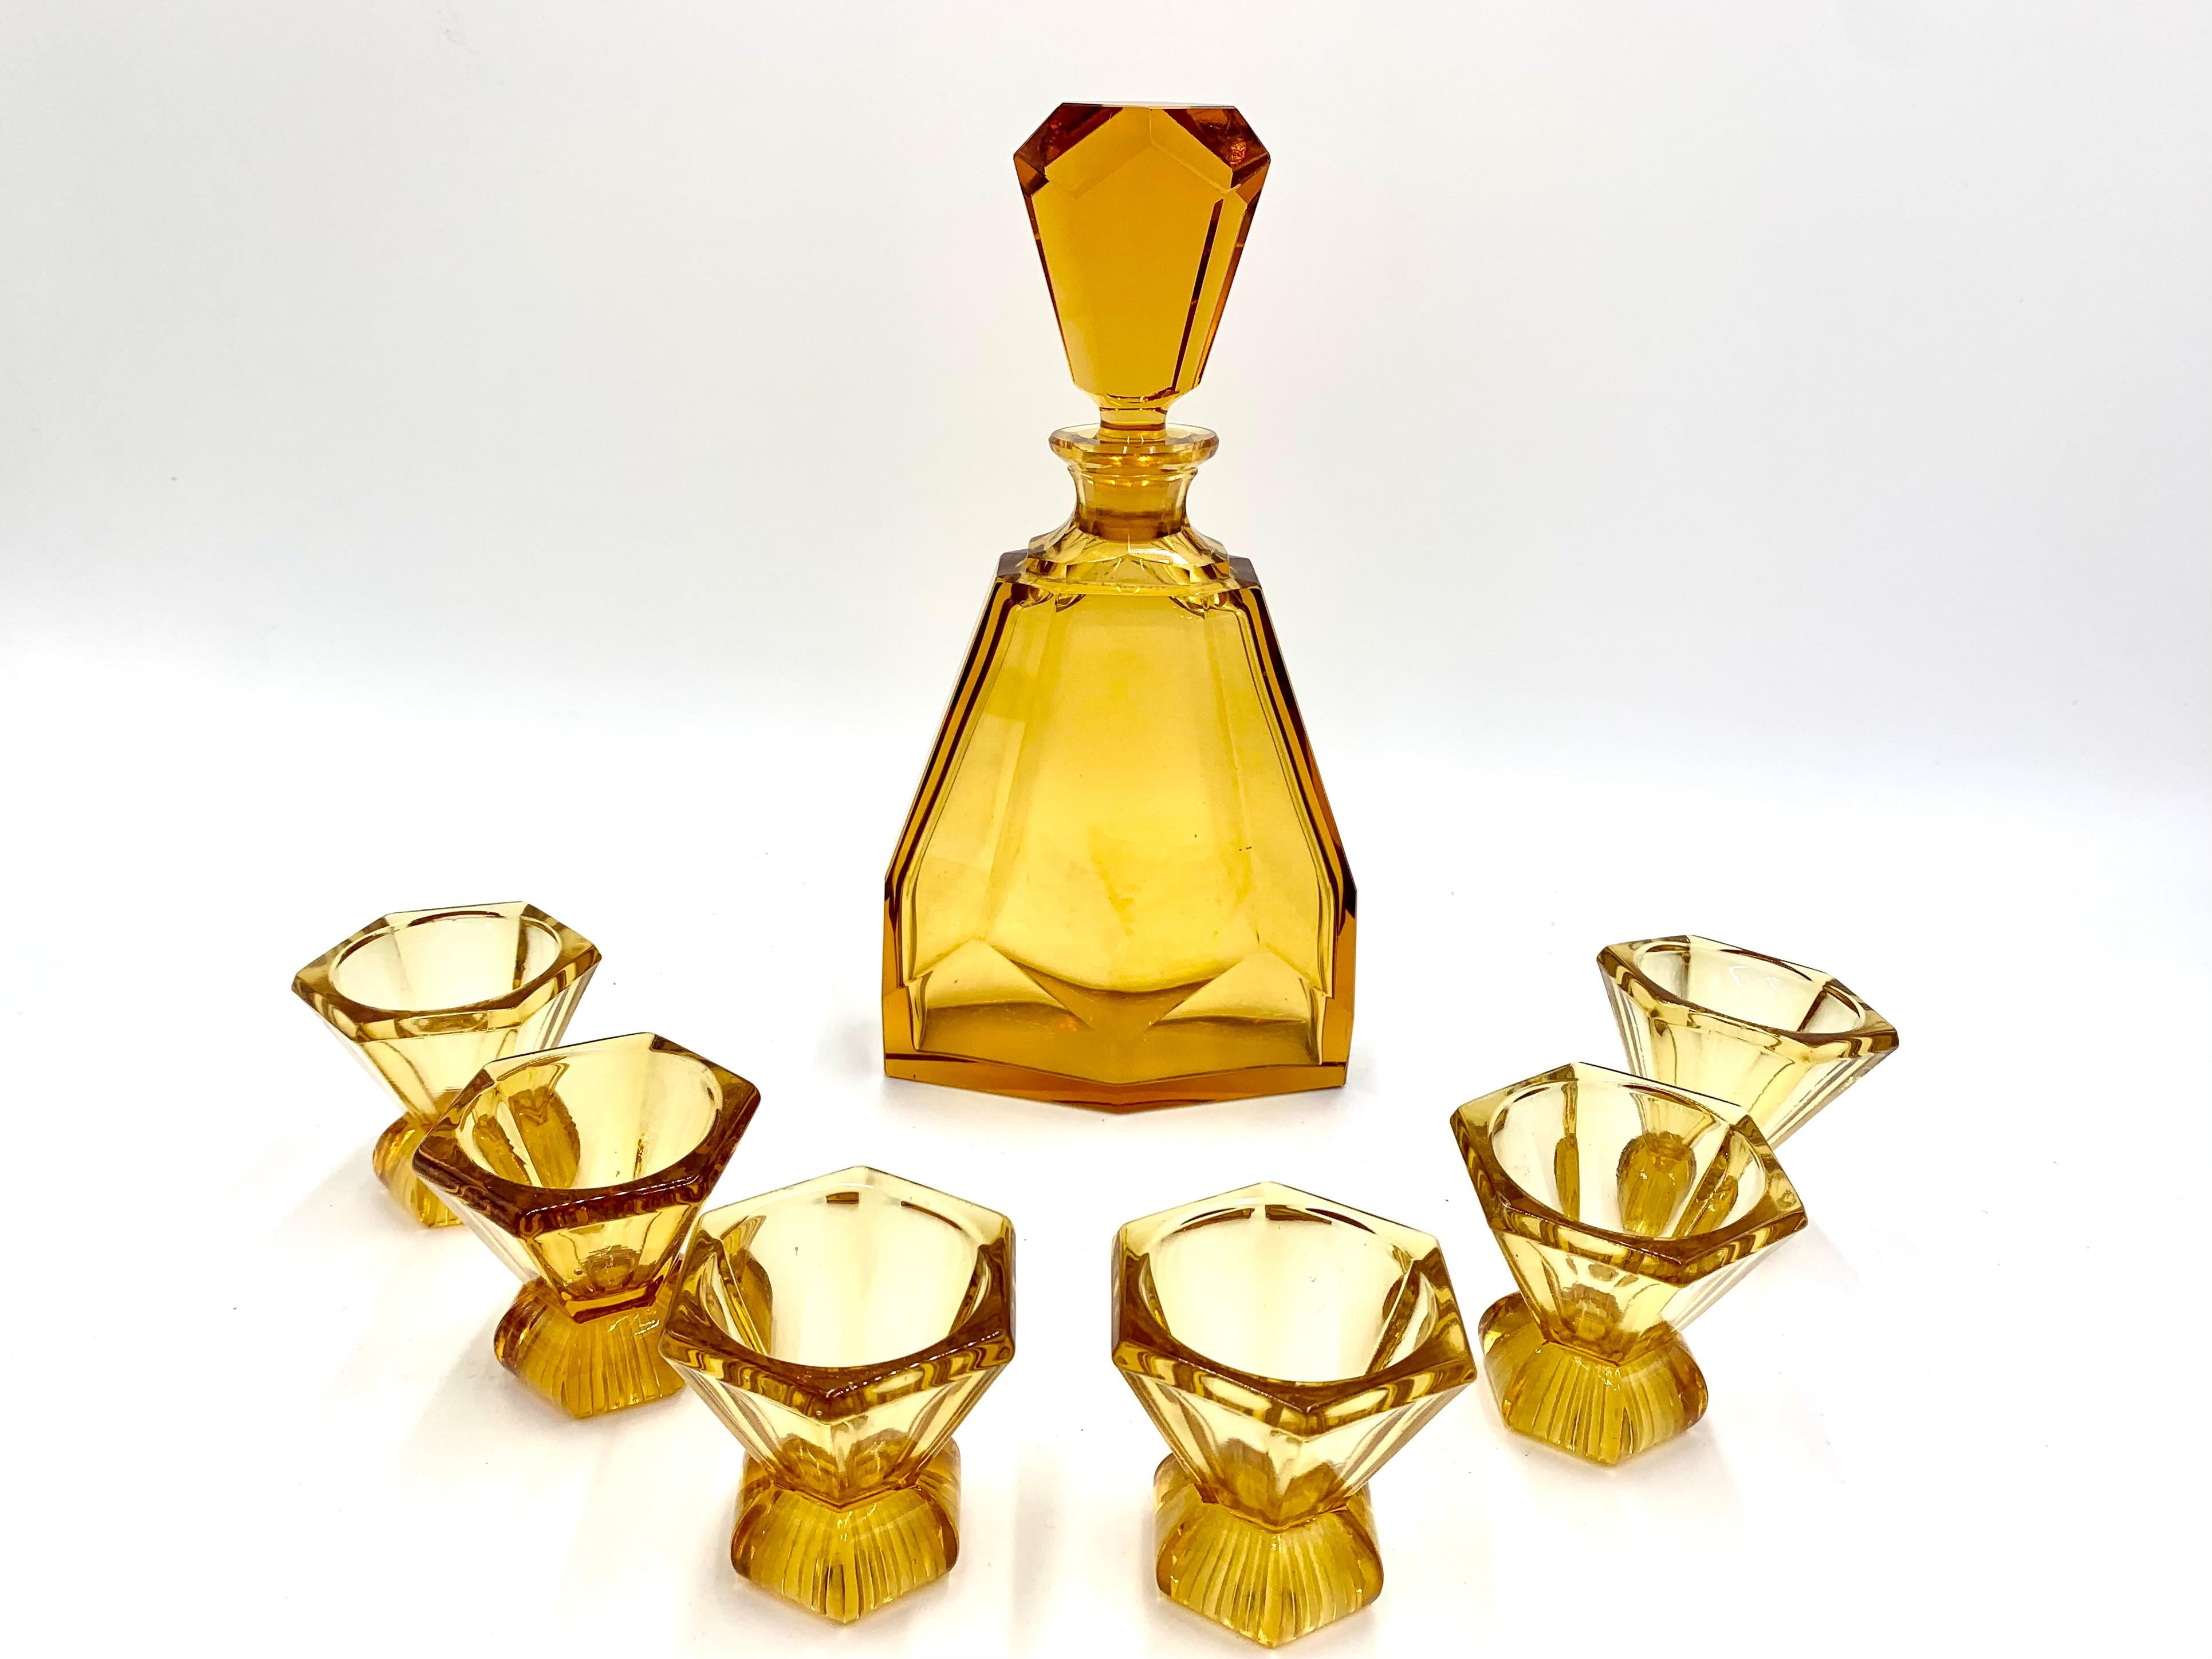 Art Deco crystal decanter complete with 6 vodka / liqueur glasses in honey color.

Made in the Czech Republic in the 1930s.

Very good condition, no damage.

The height of the decanter with a cork is 23 cm, width 13 cm

The glasses are 6 cm